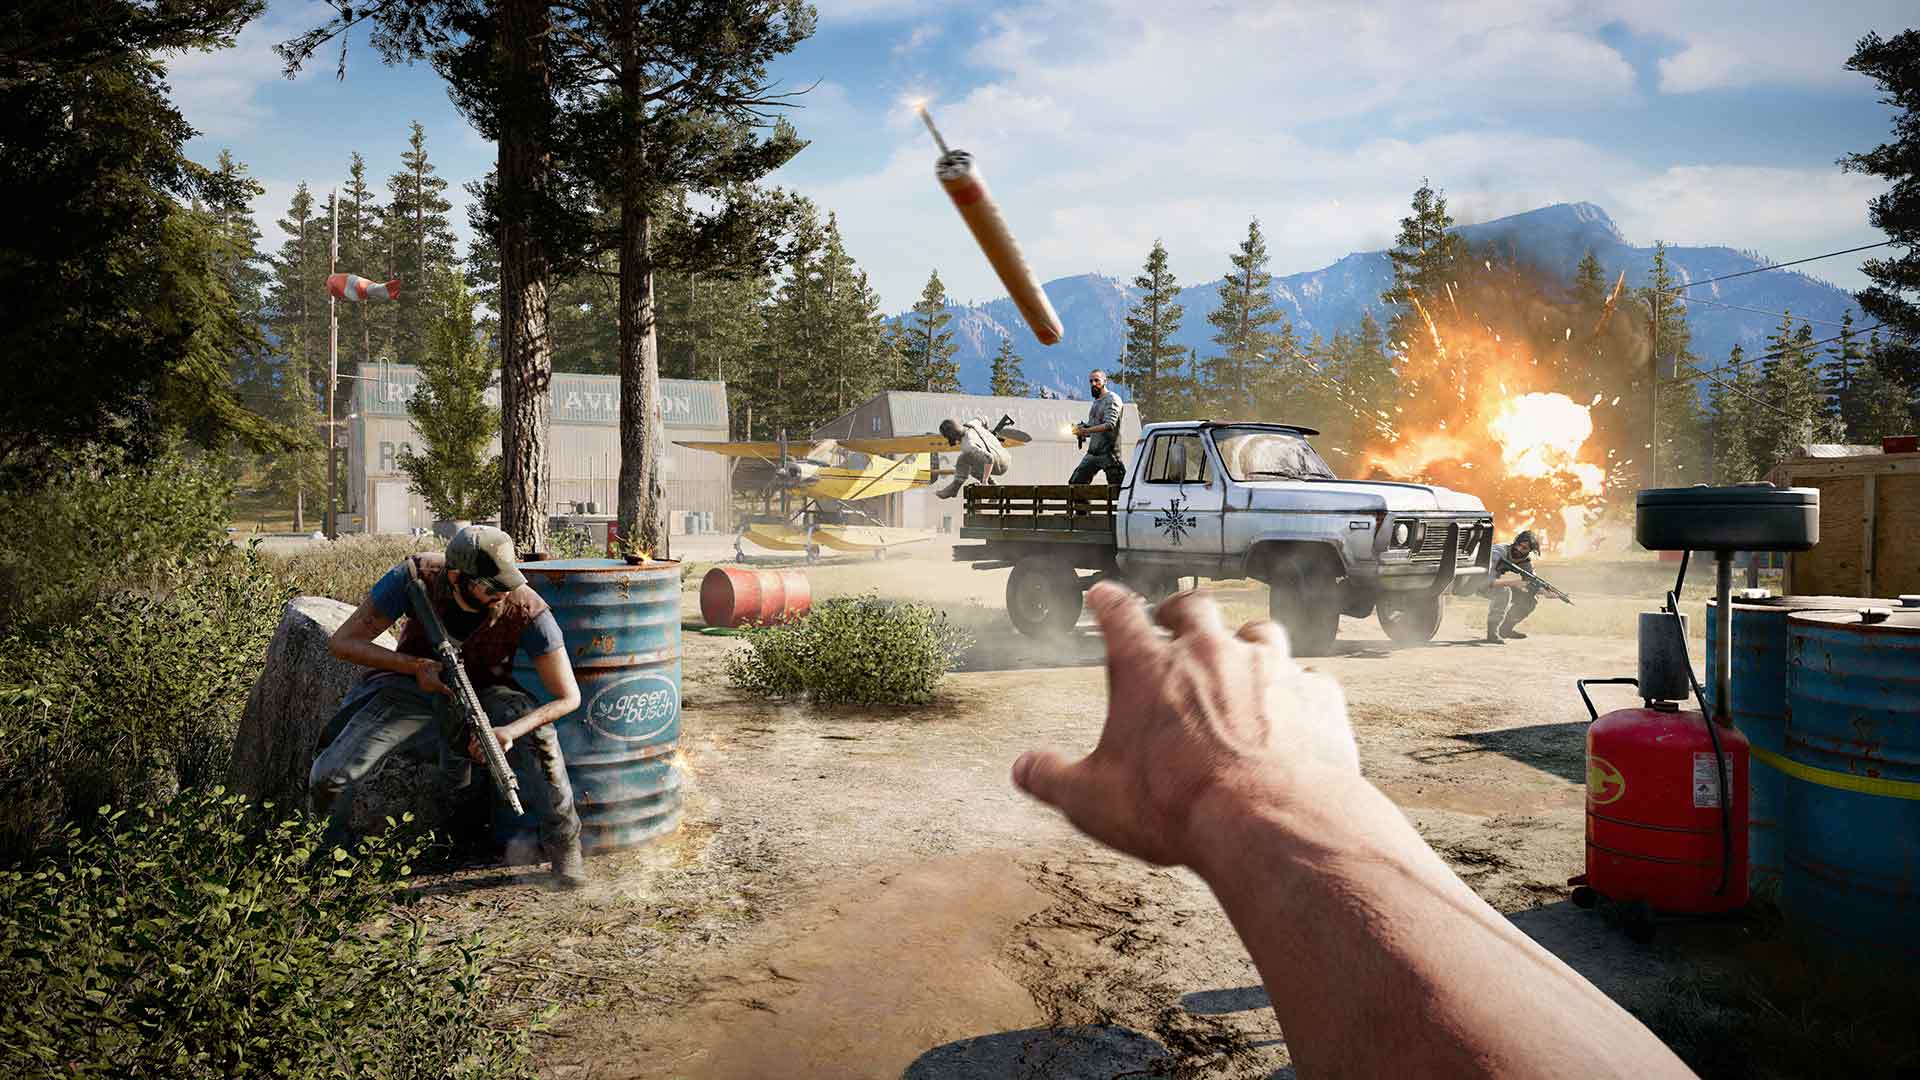 New Xbox Game Pass Games Include Far Cry 5, Available Now - GameSpot